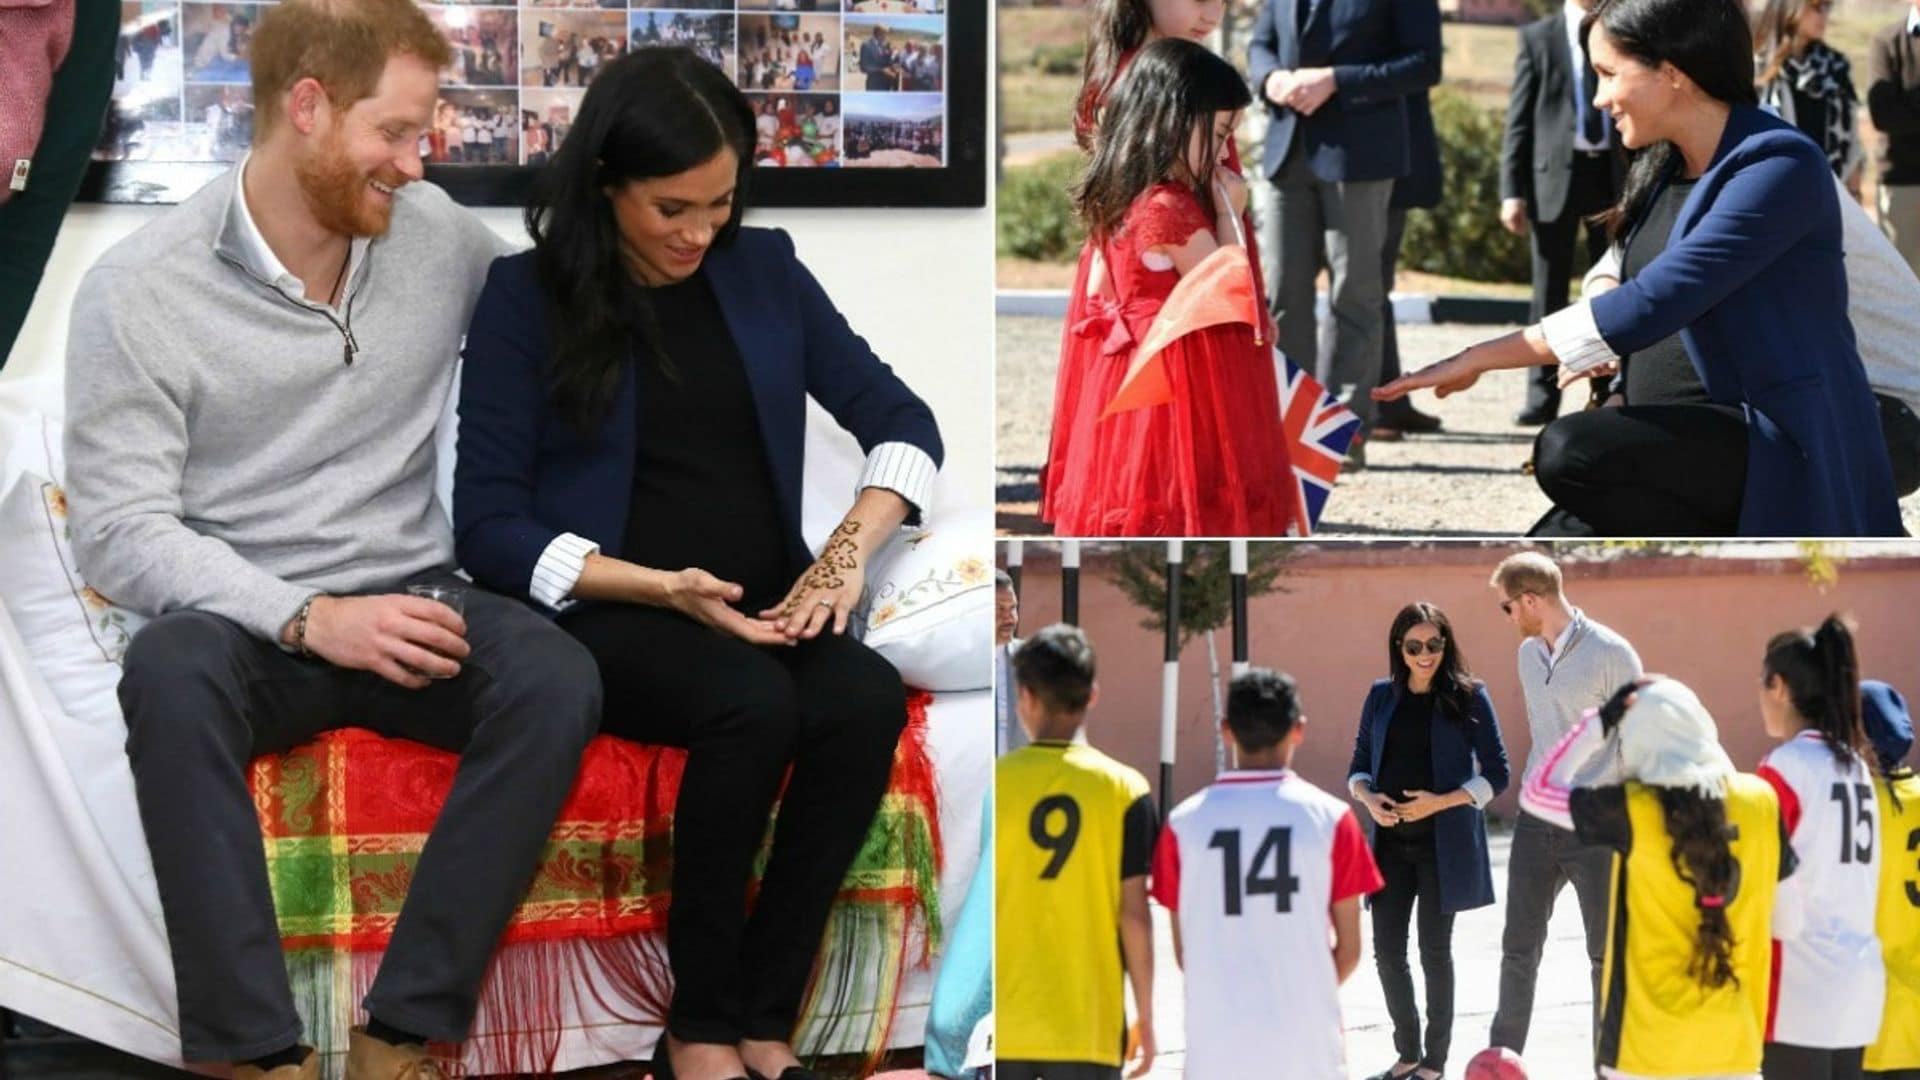 Meghan Markle and Prince Harry bond with locals, get a tattoo and more on second day in Morocco